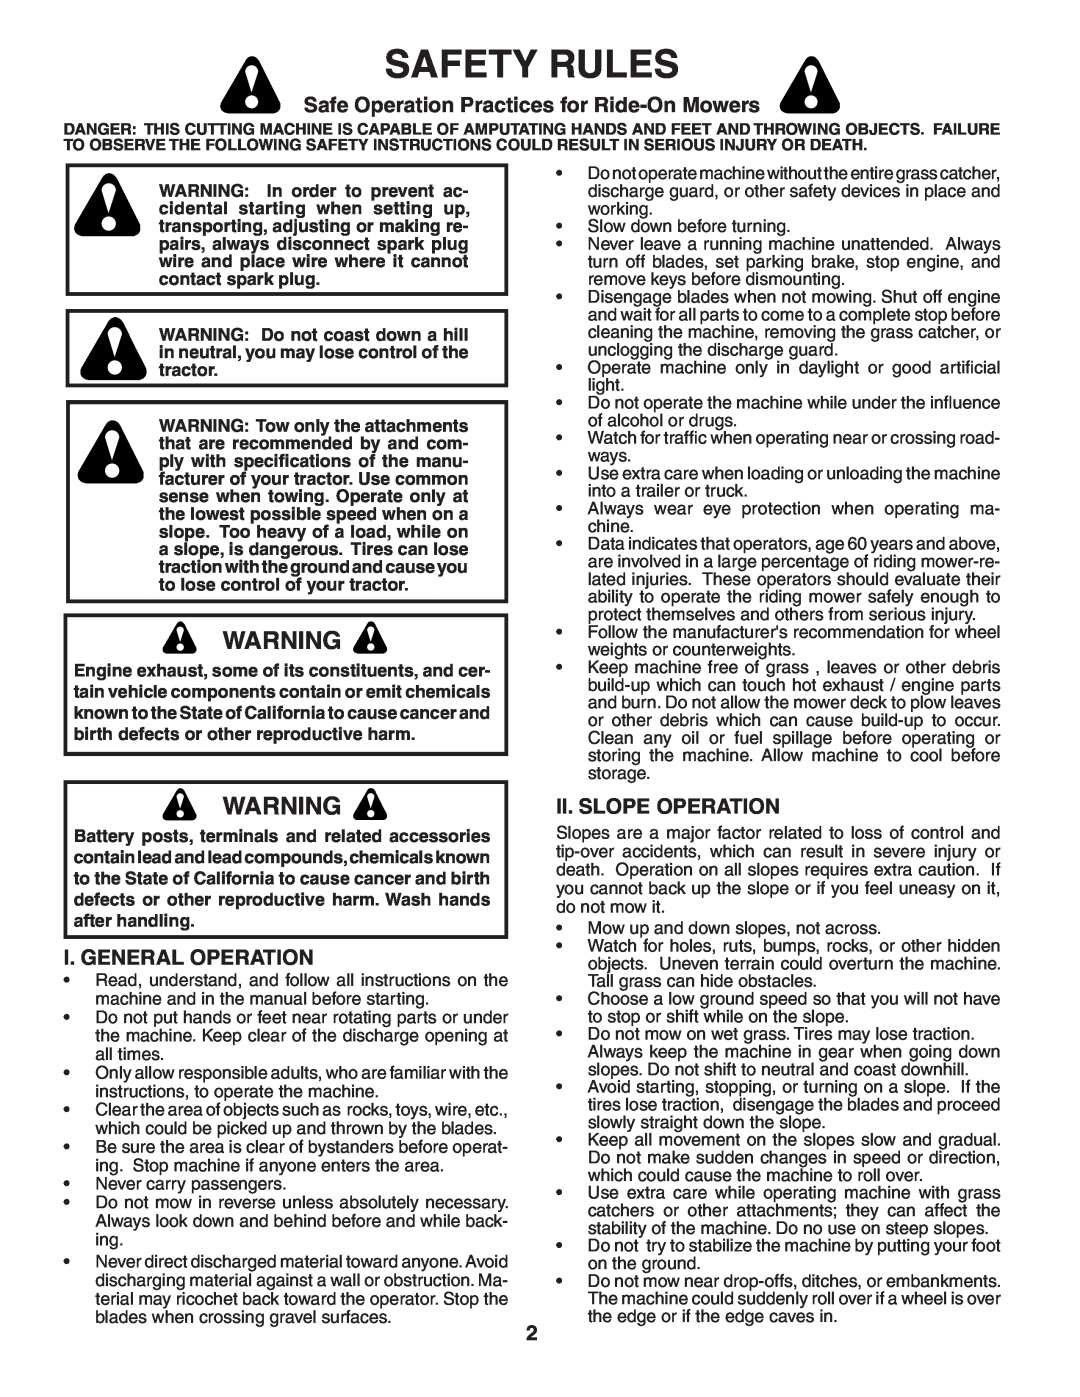 Poulan 402495 manual Safety Rules, Safe Operation Practices for Ride-On Mowers, I. General Operation, Ii. Slope Operation 